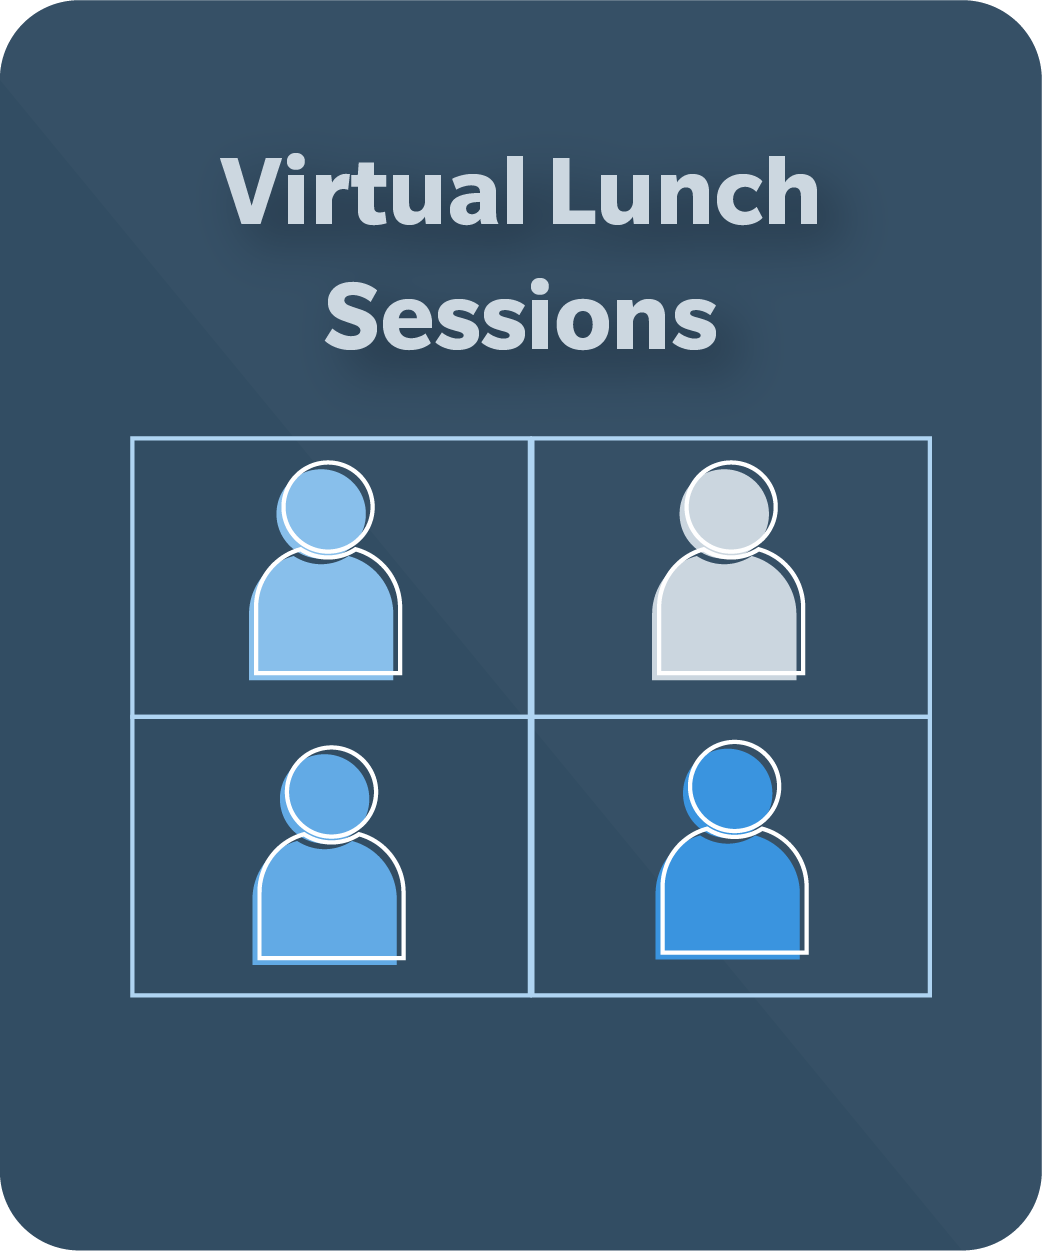 Virtual Lunch Sessions